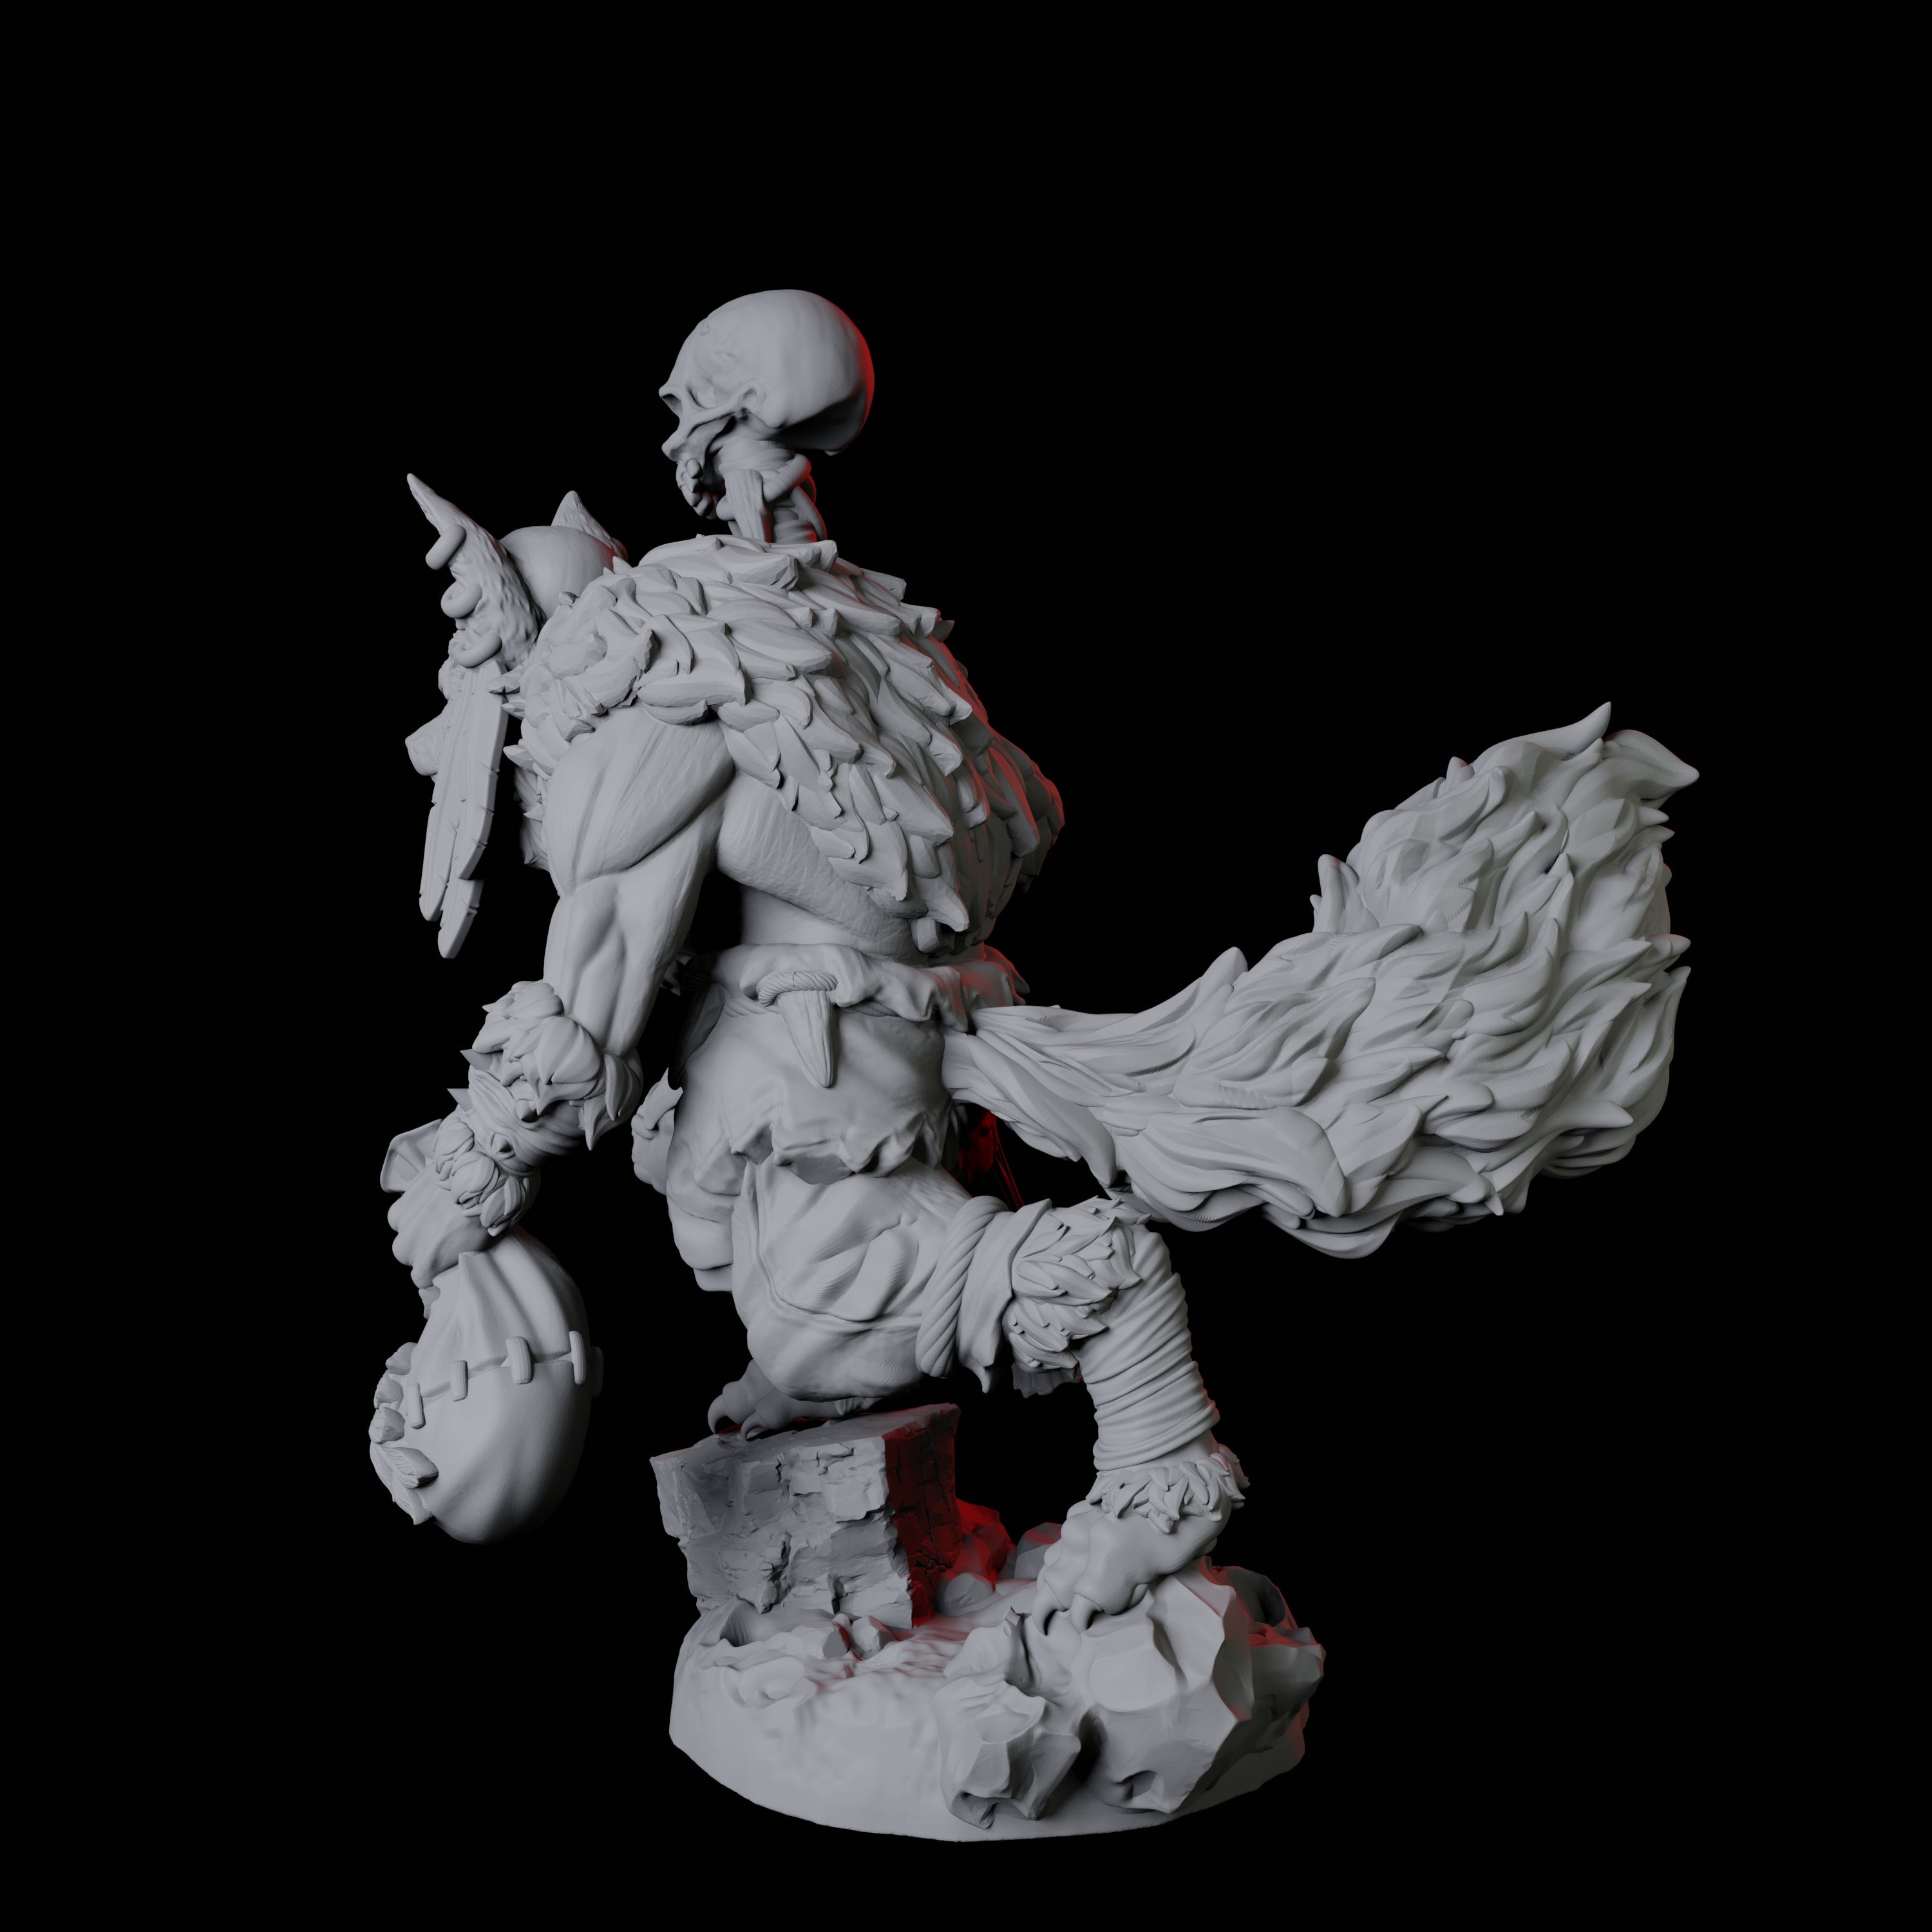 Cunning Kitsune Fighter D Miniature for Dungeons and Dragons, Pathfinder or other TTRPGs